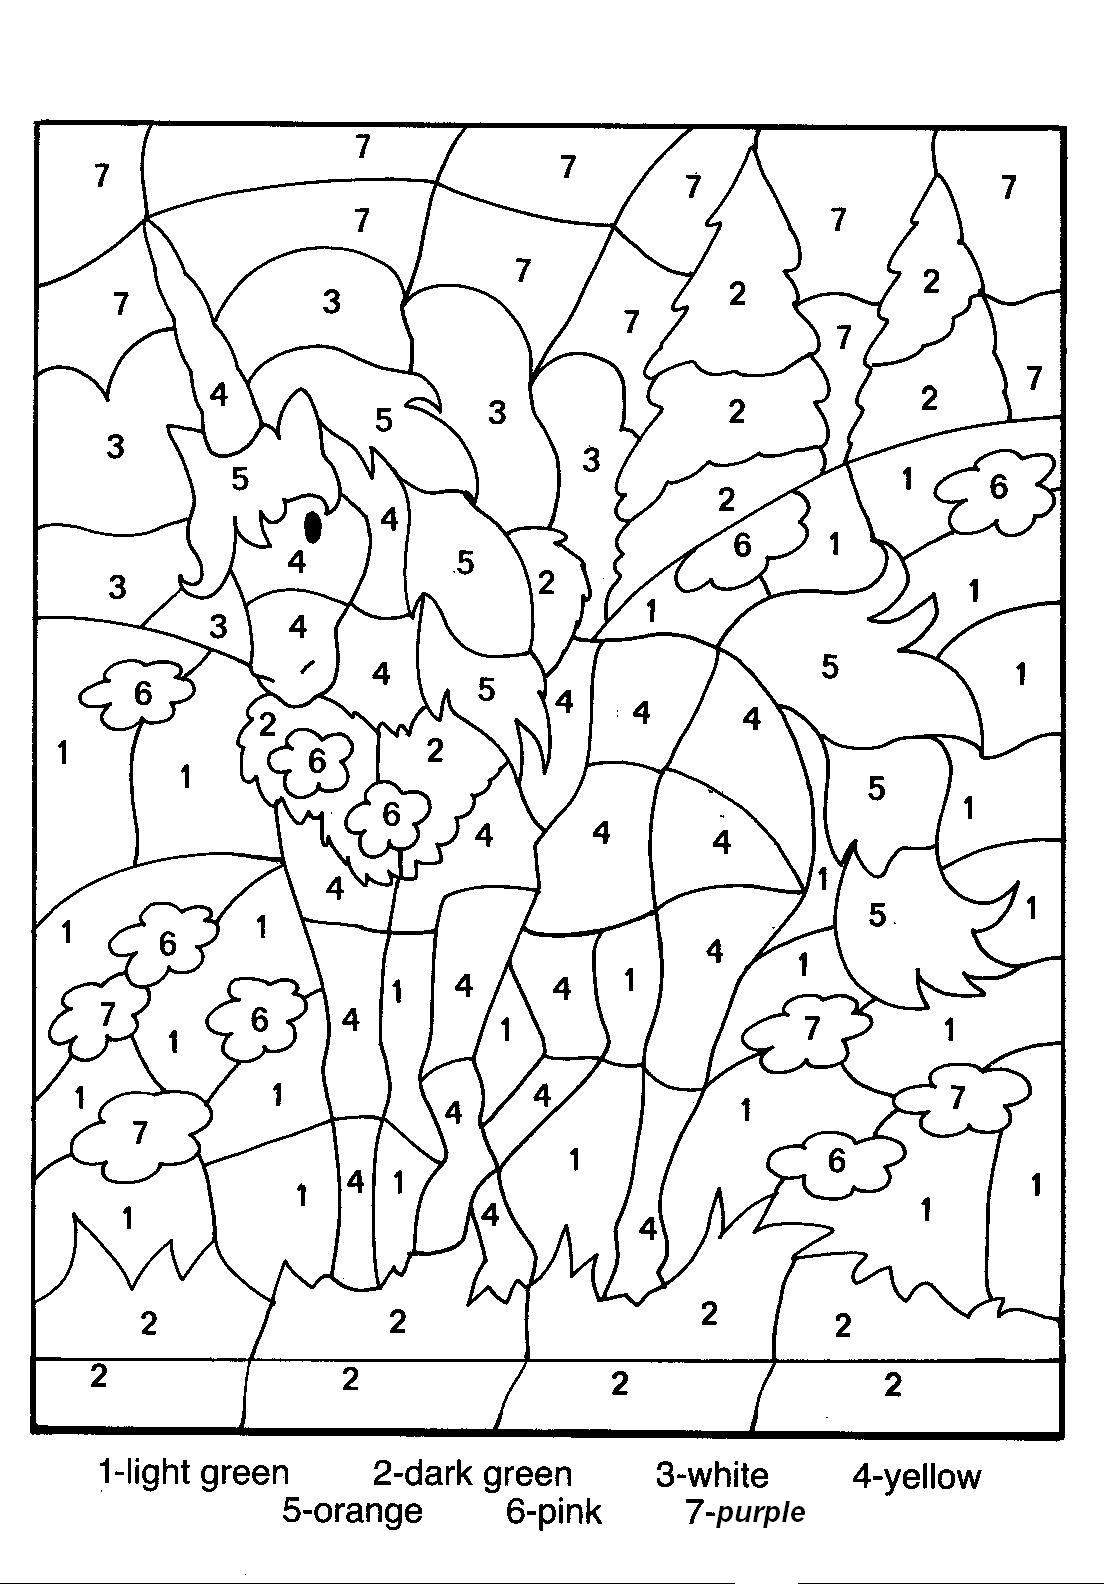 Colors Coloring Pages Free Printable Color Number Coloring Pages Best Coloring Pages